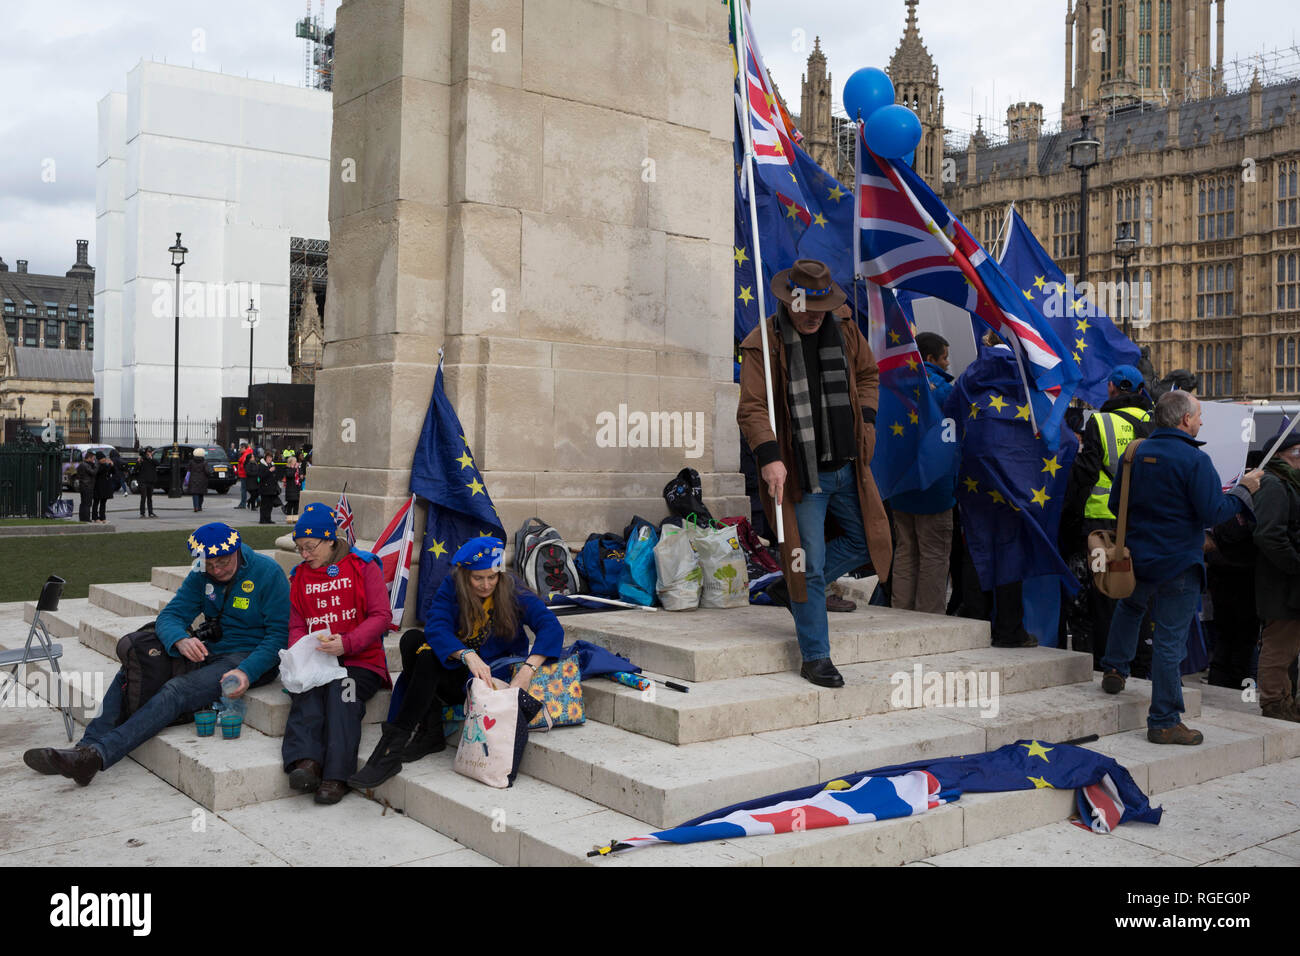 London, UK. 29th January, 2019.On the day that the UK Parliament once again votes on an amendment of Prime Minister Theresa May's Brexit deal that requires another negotiation with the EU in Brussels, pro-EU protesters gather outside the House of Commons, on 29th January 2019, in Westminster, London, England. Photo by Richard Baker / Alamy Live News. Stock Photo